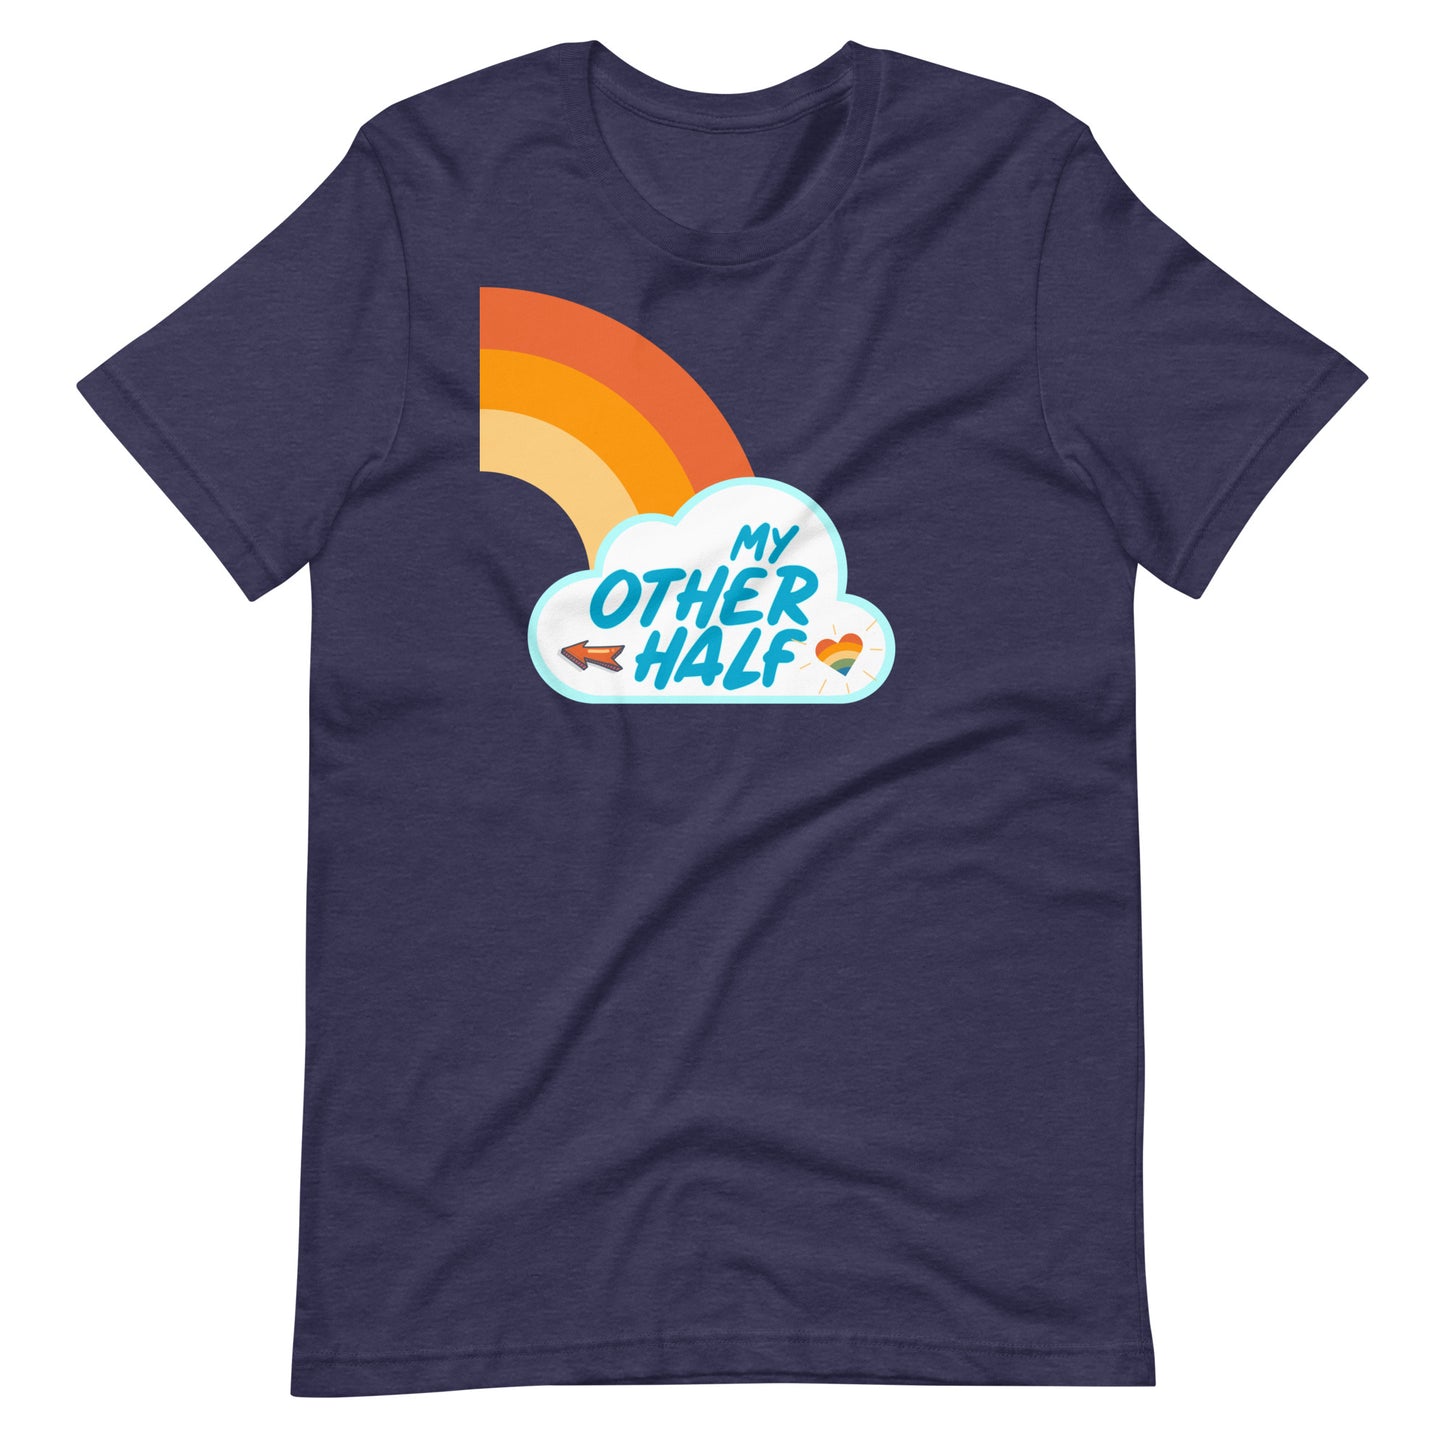 My Other Half (pointing RIGHT) Unisex t-shirt